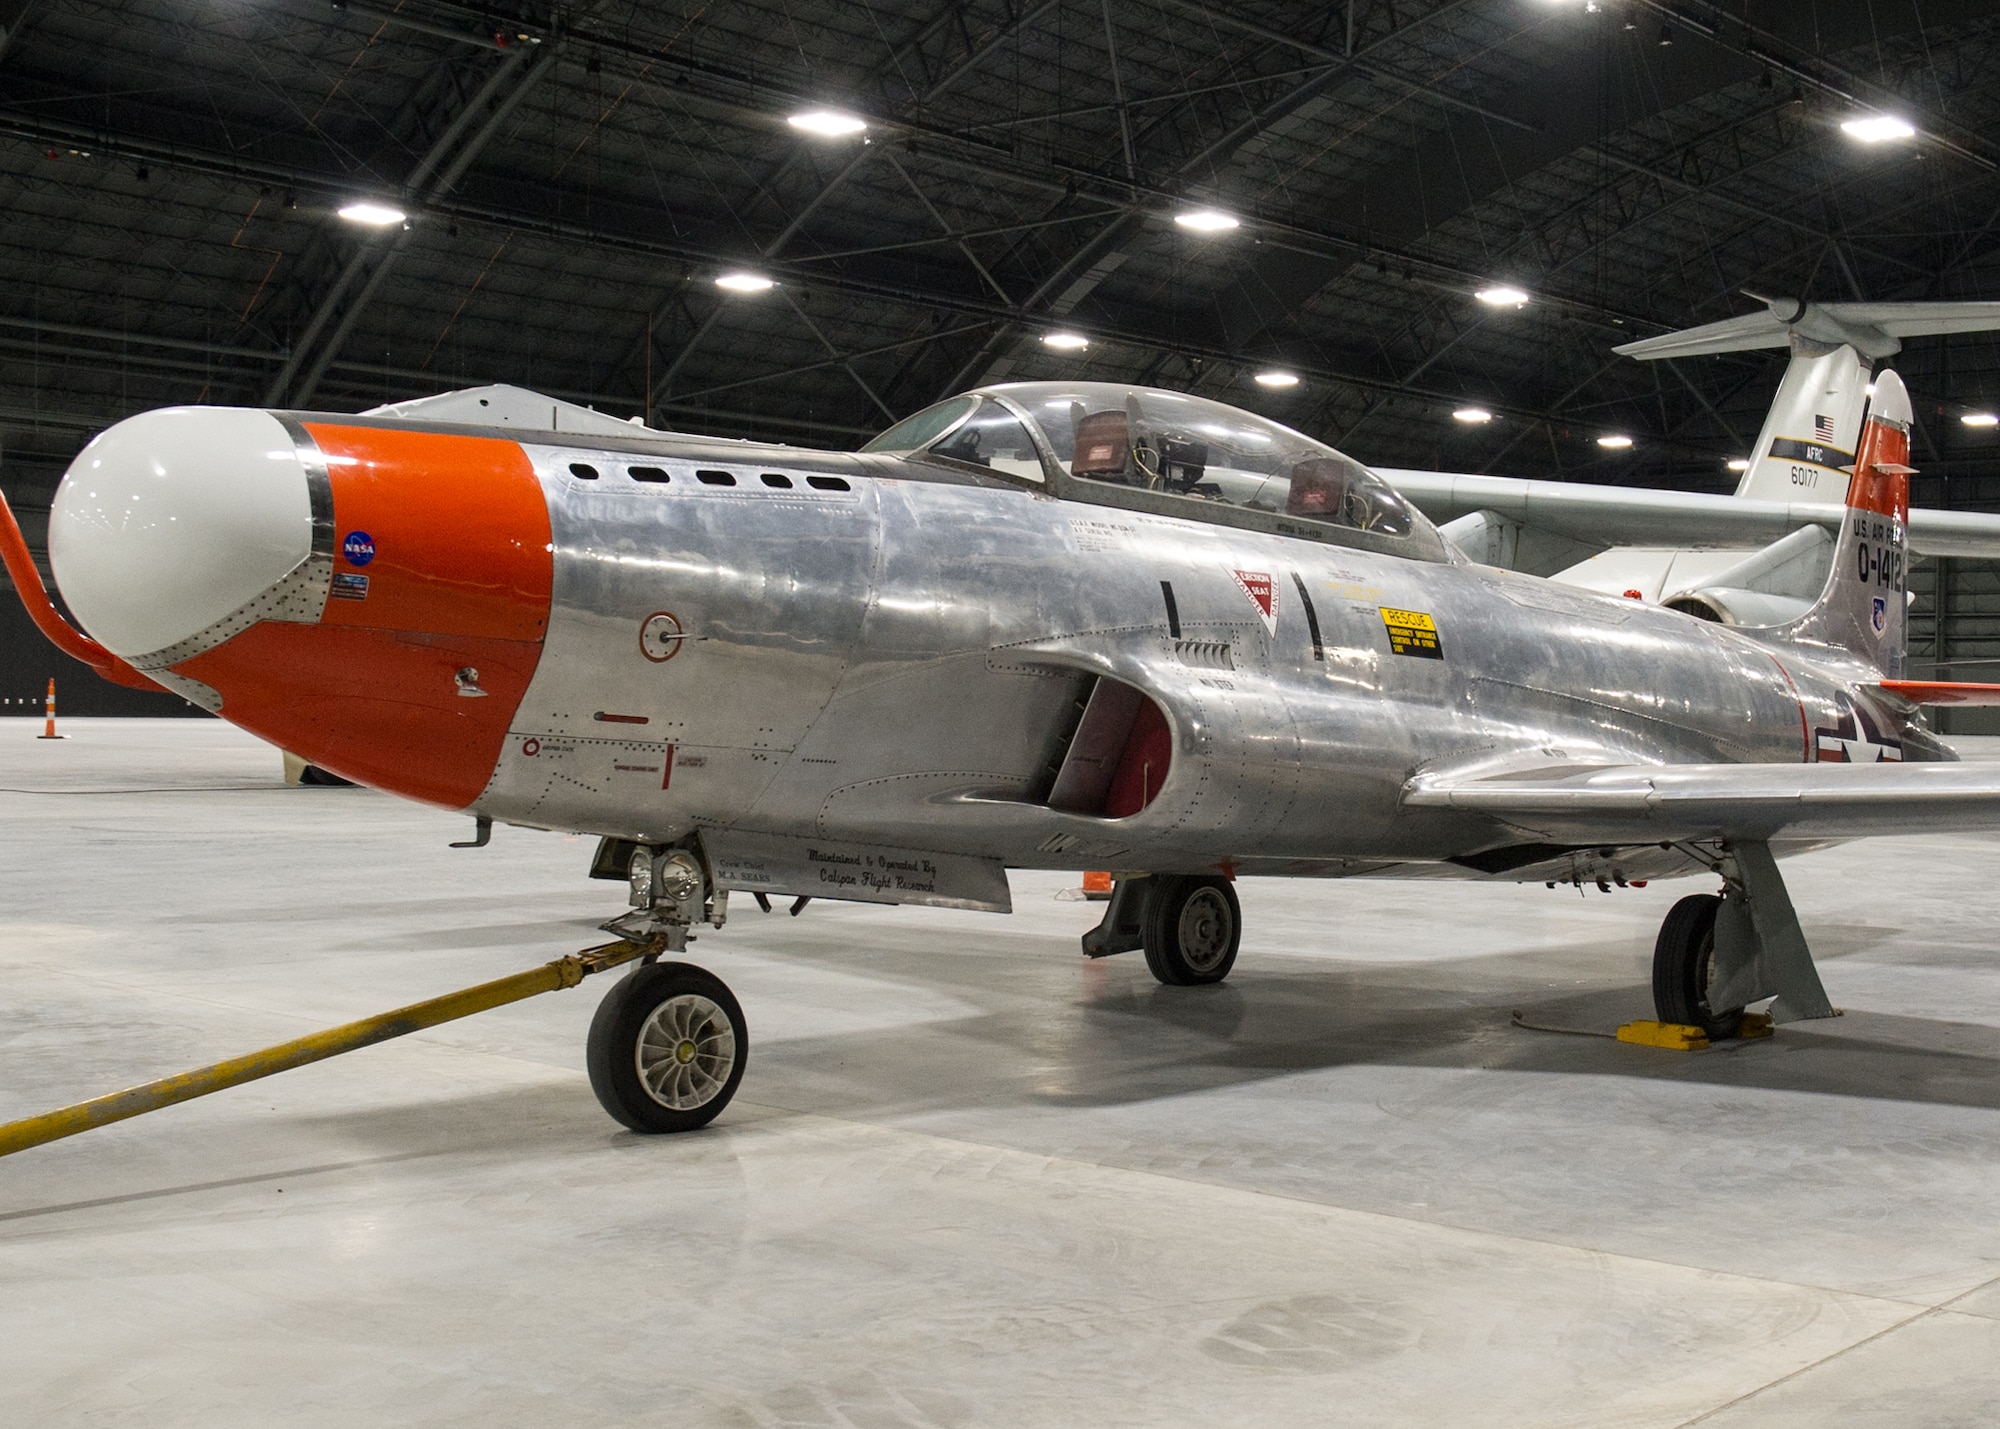 Lockheed NT-33A in the Research & Development Gallery at the National Museum of the U.S. Air Force. (U.S. Air Force photo)